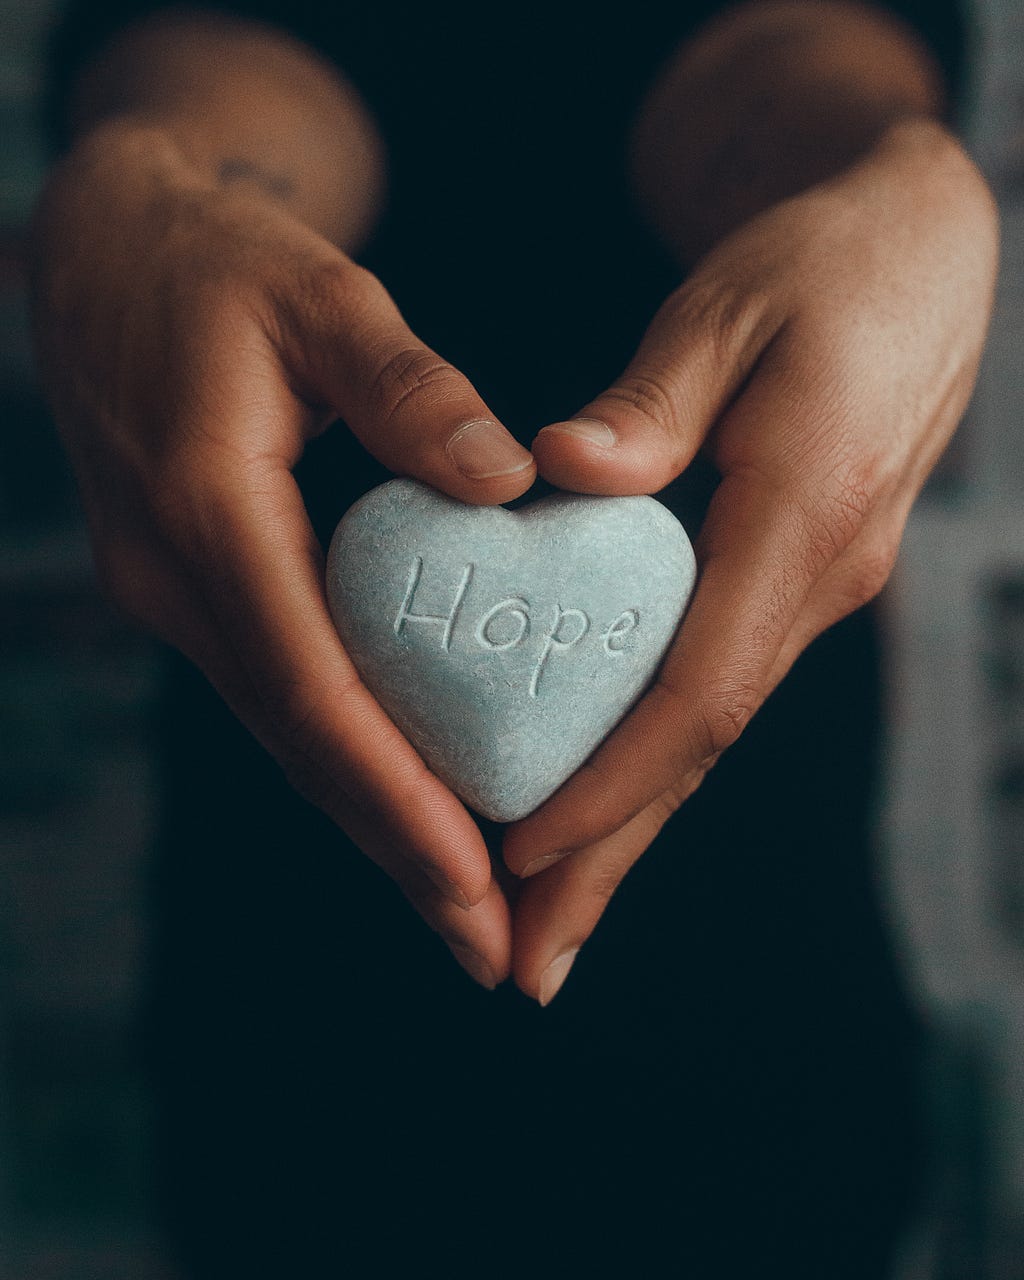 hands hold heart shaped stone with word hope